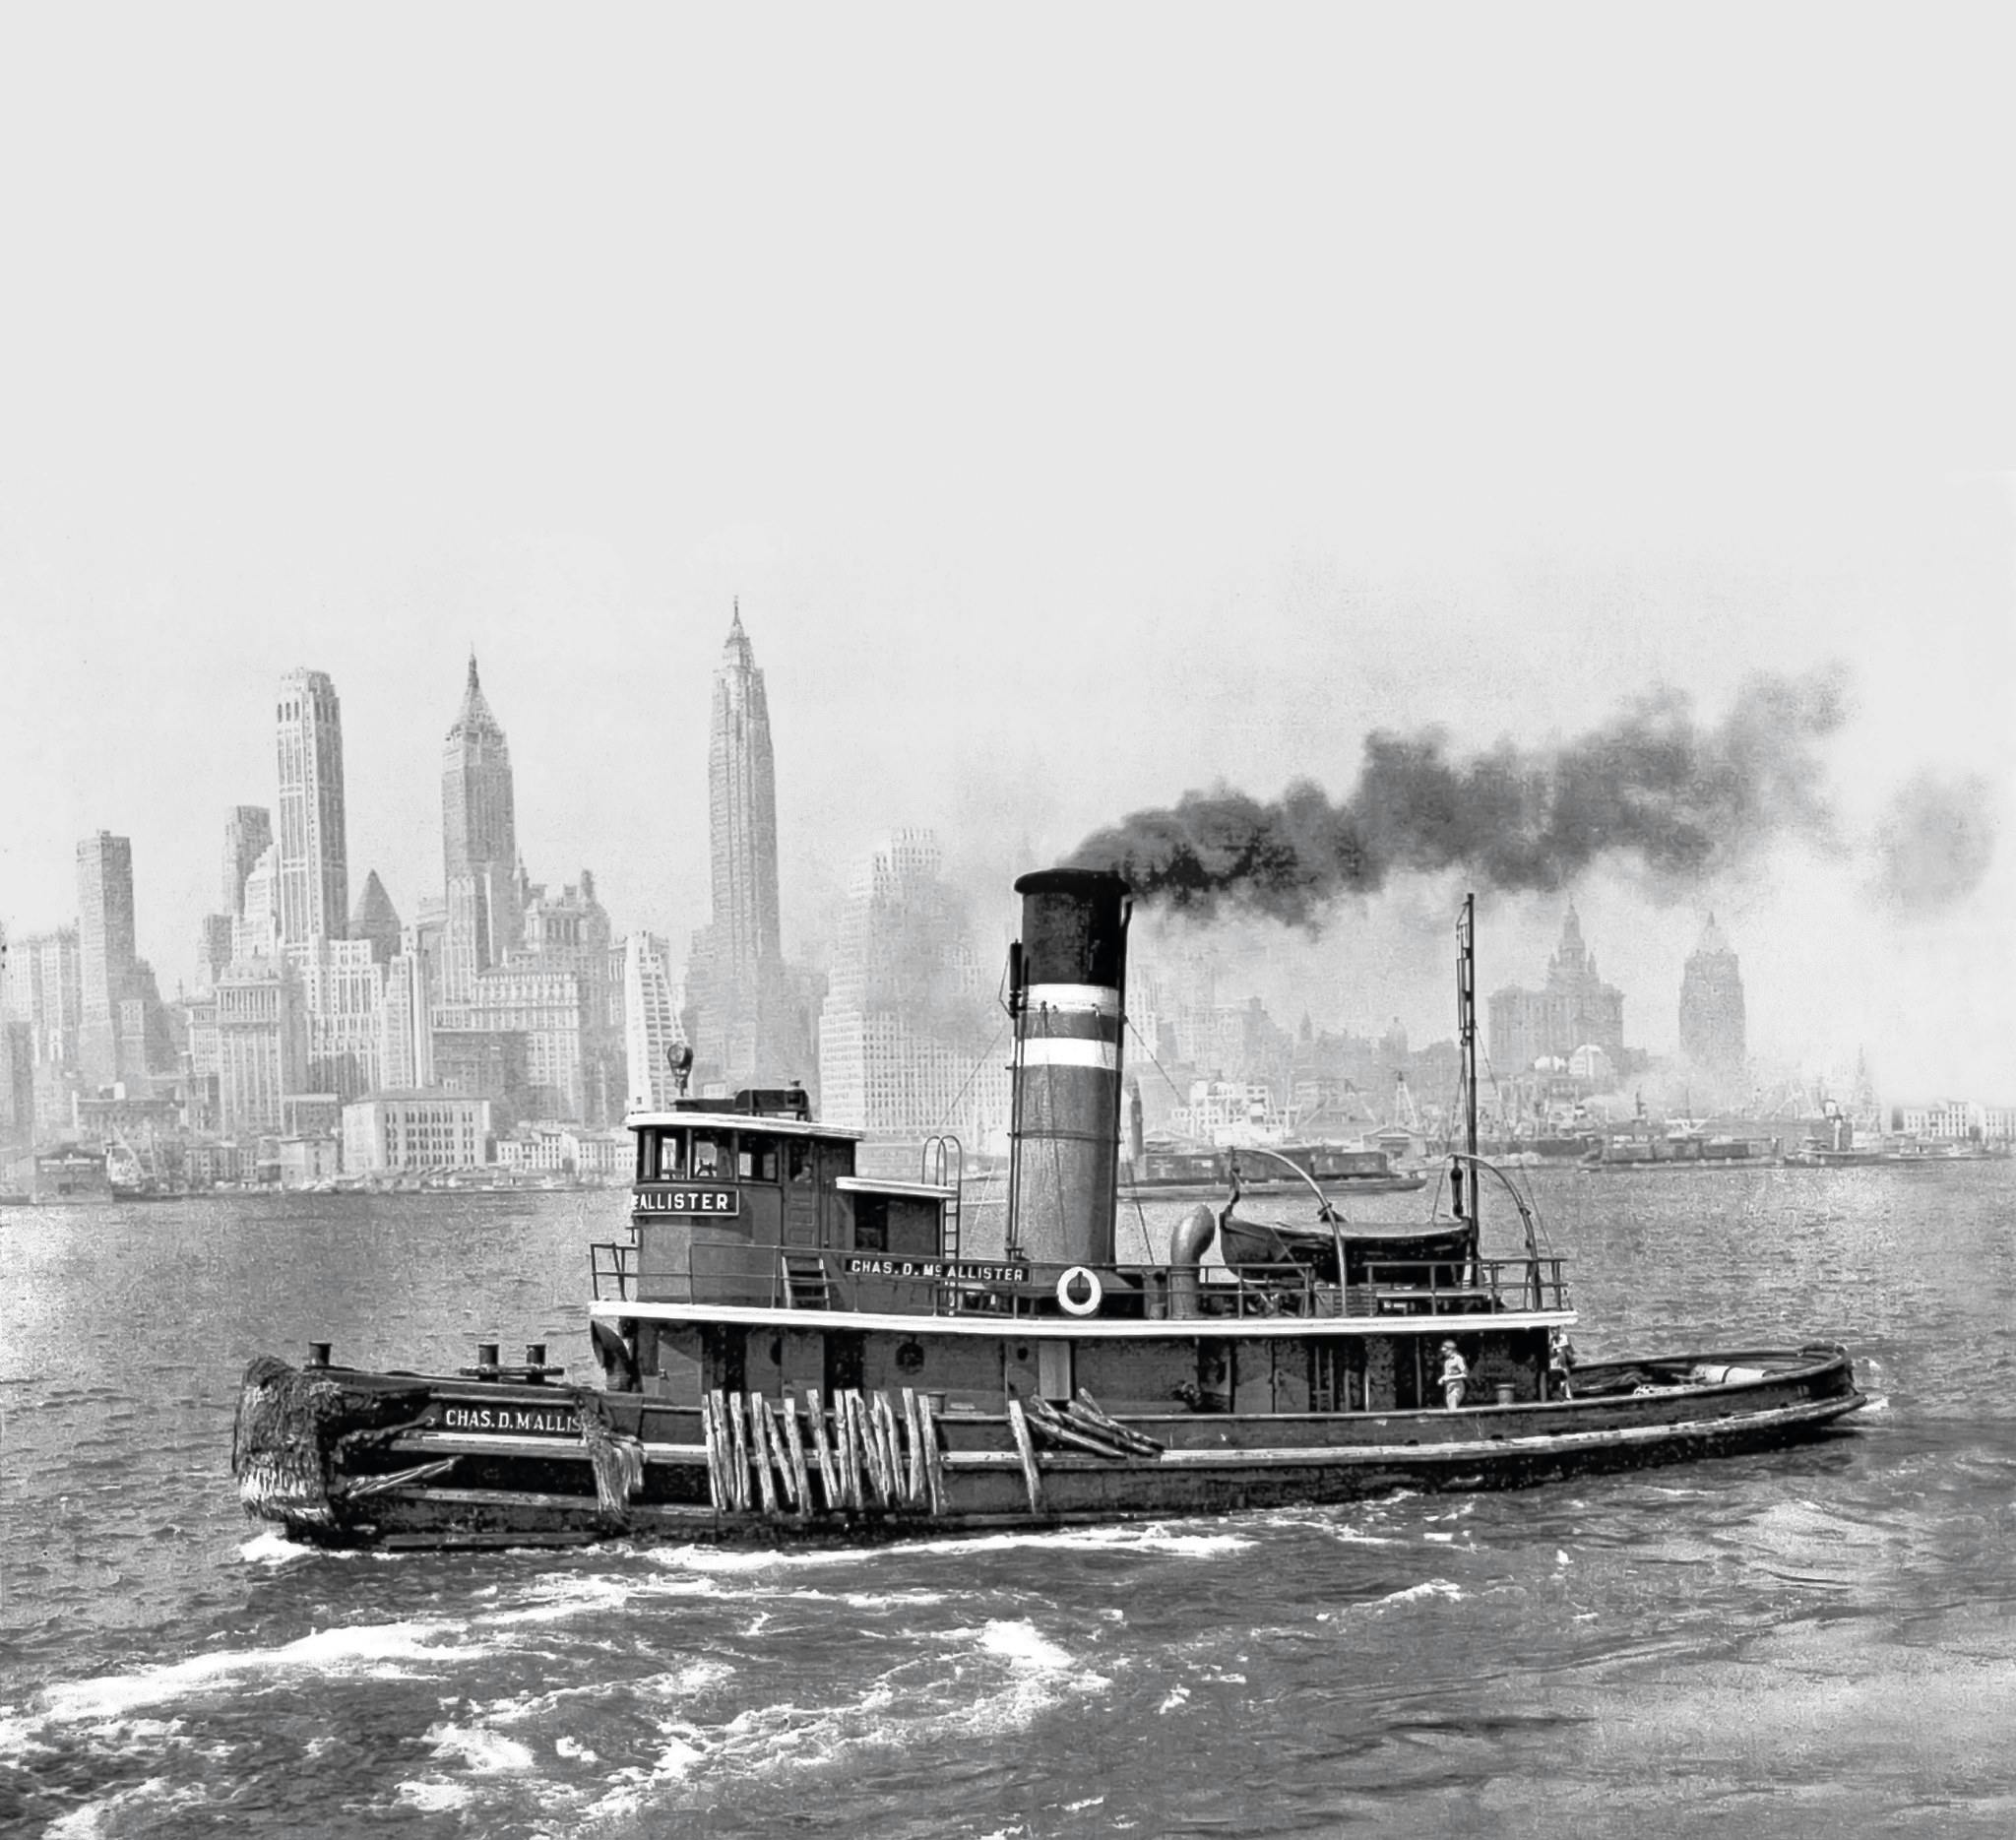 The Chas D. McAllister in New York harbor circa 1940.